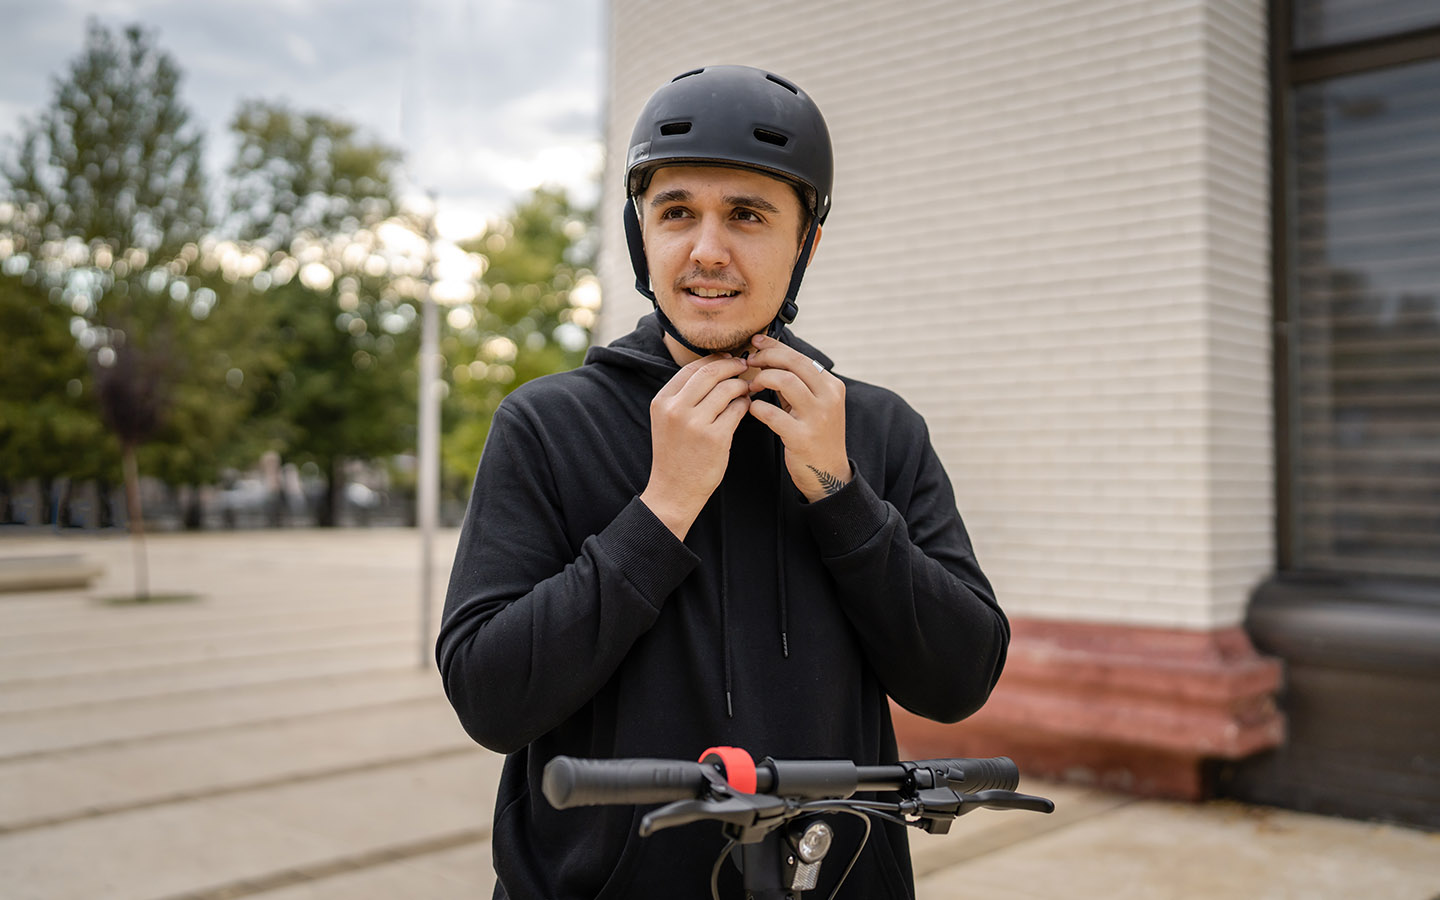 RTA E-Scooter User Obligations make wearing helmet compulsory for all riders